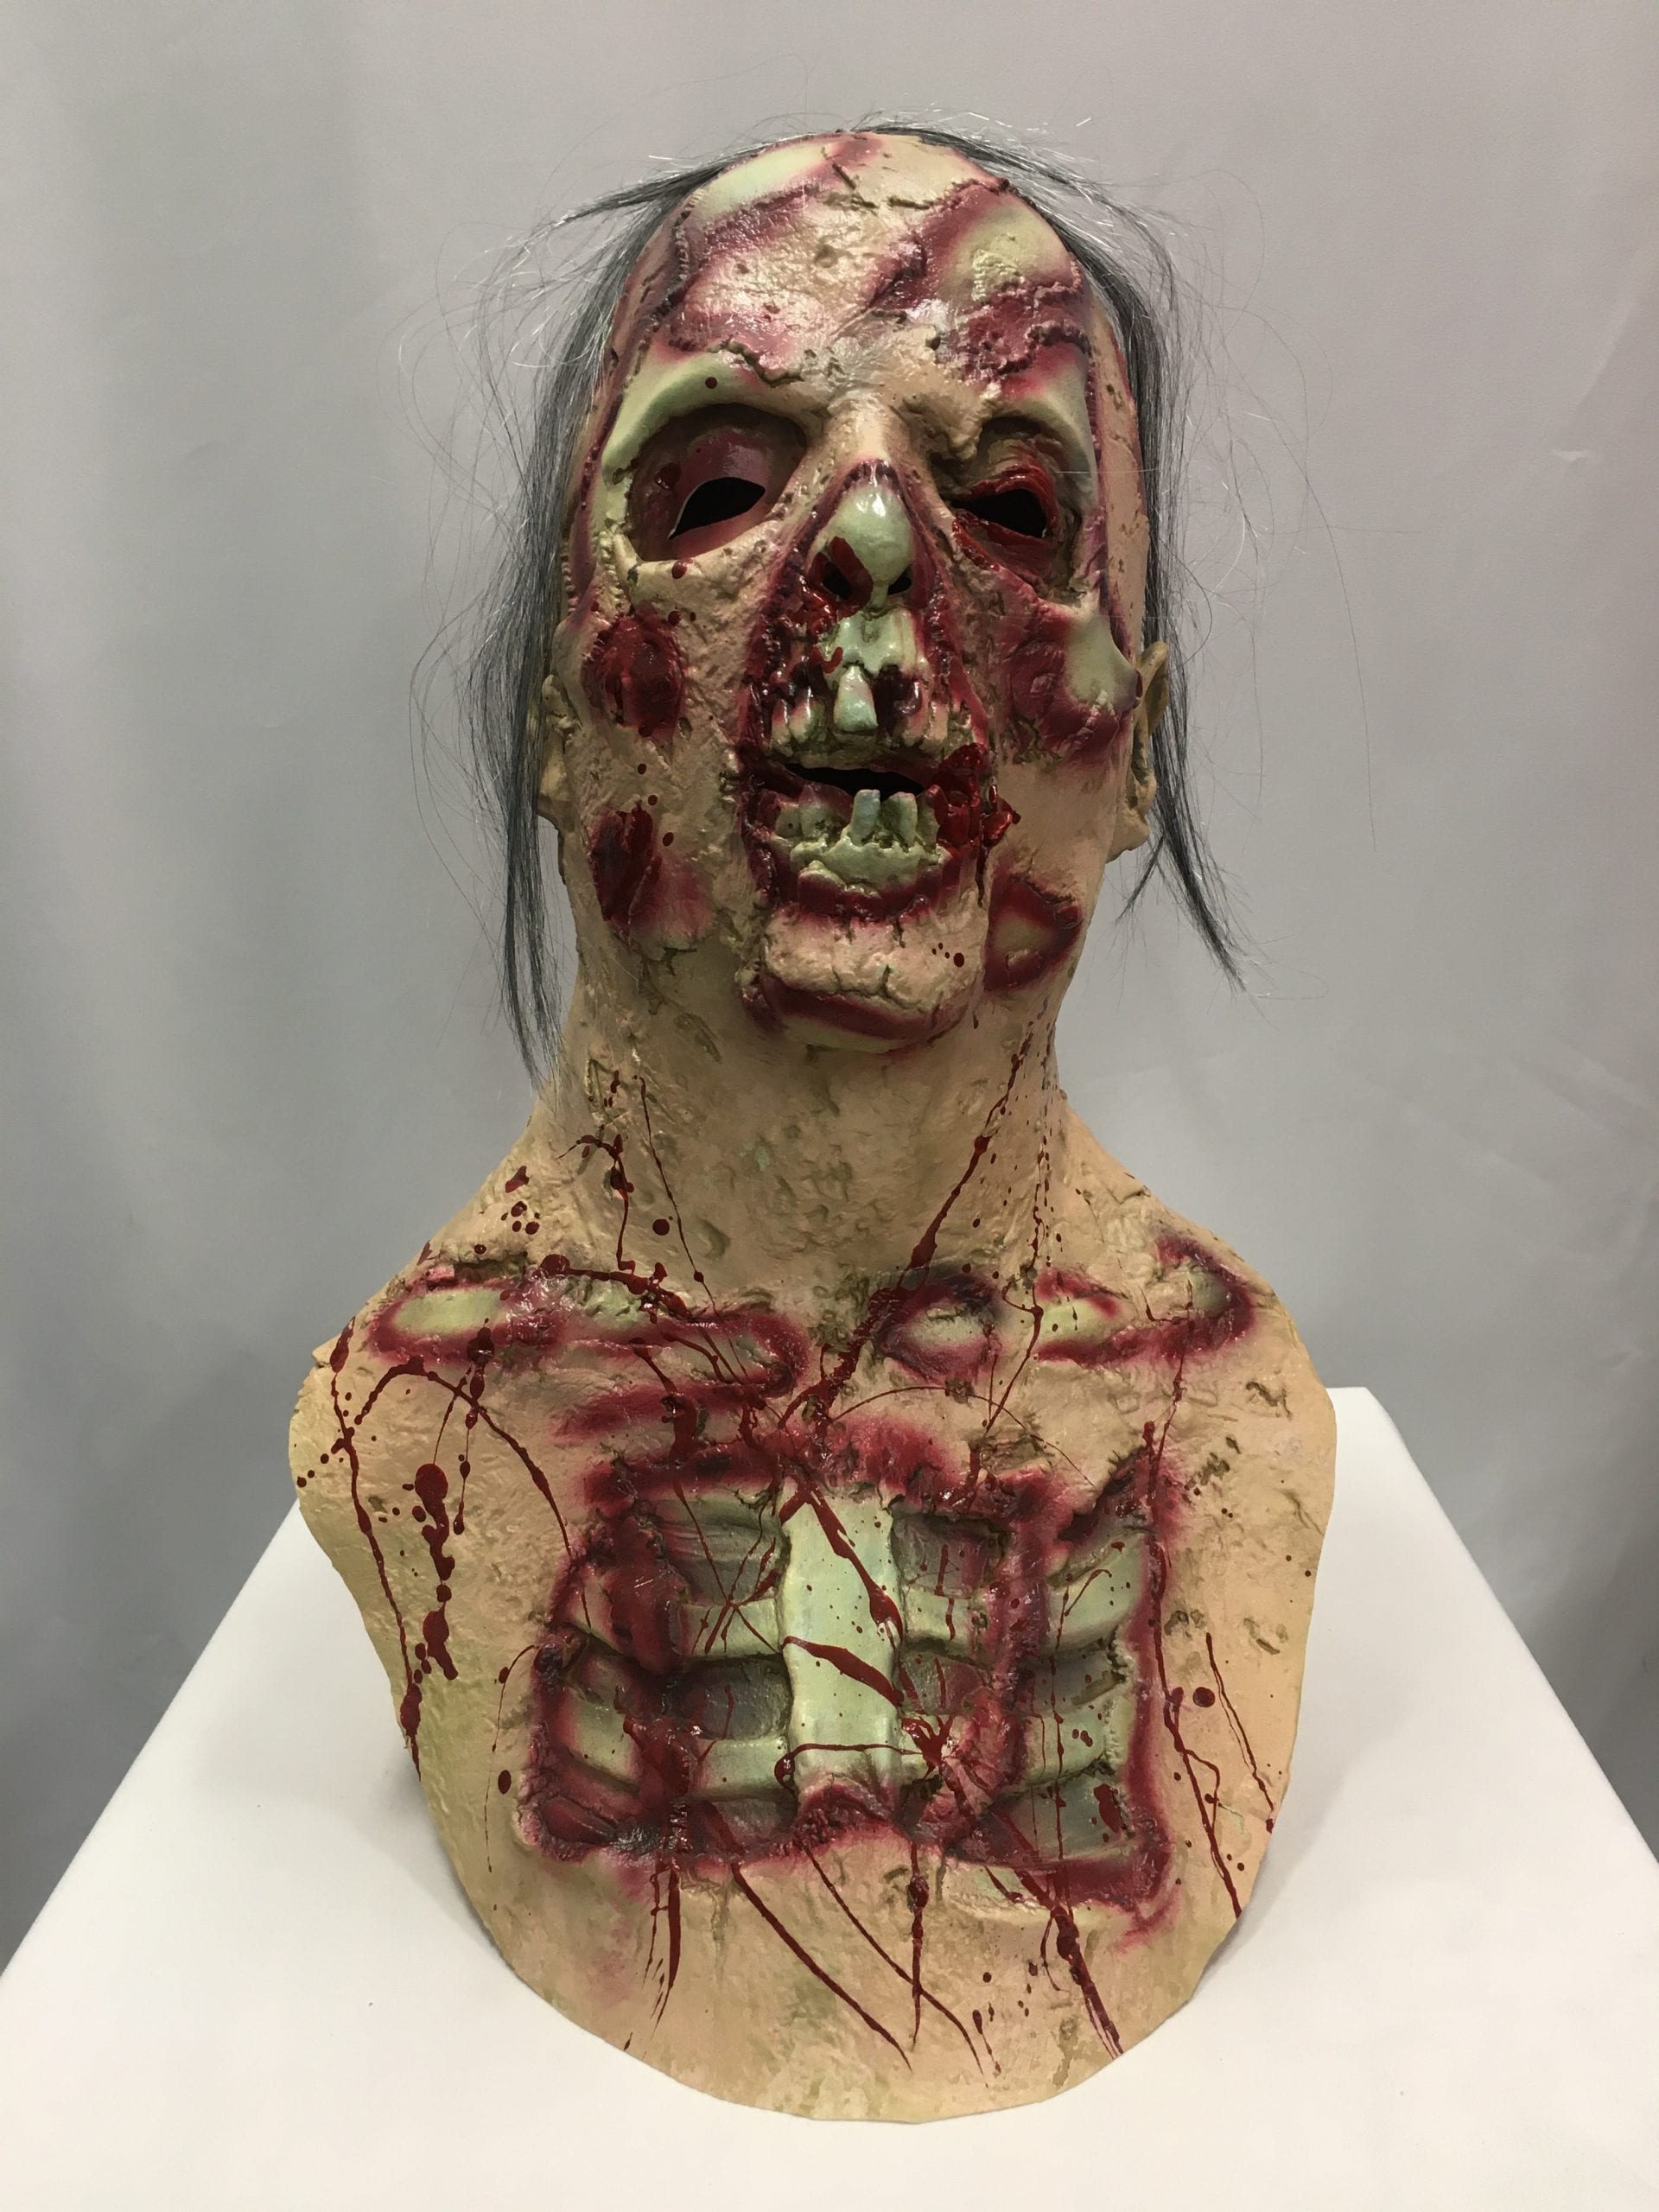 Featured image for “Bloody Zombie Cowl Mask”